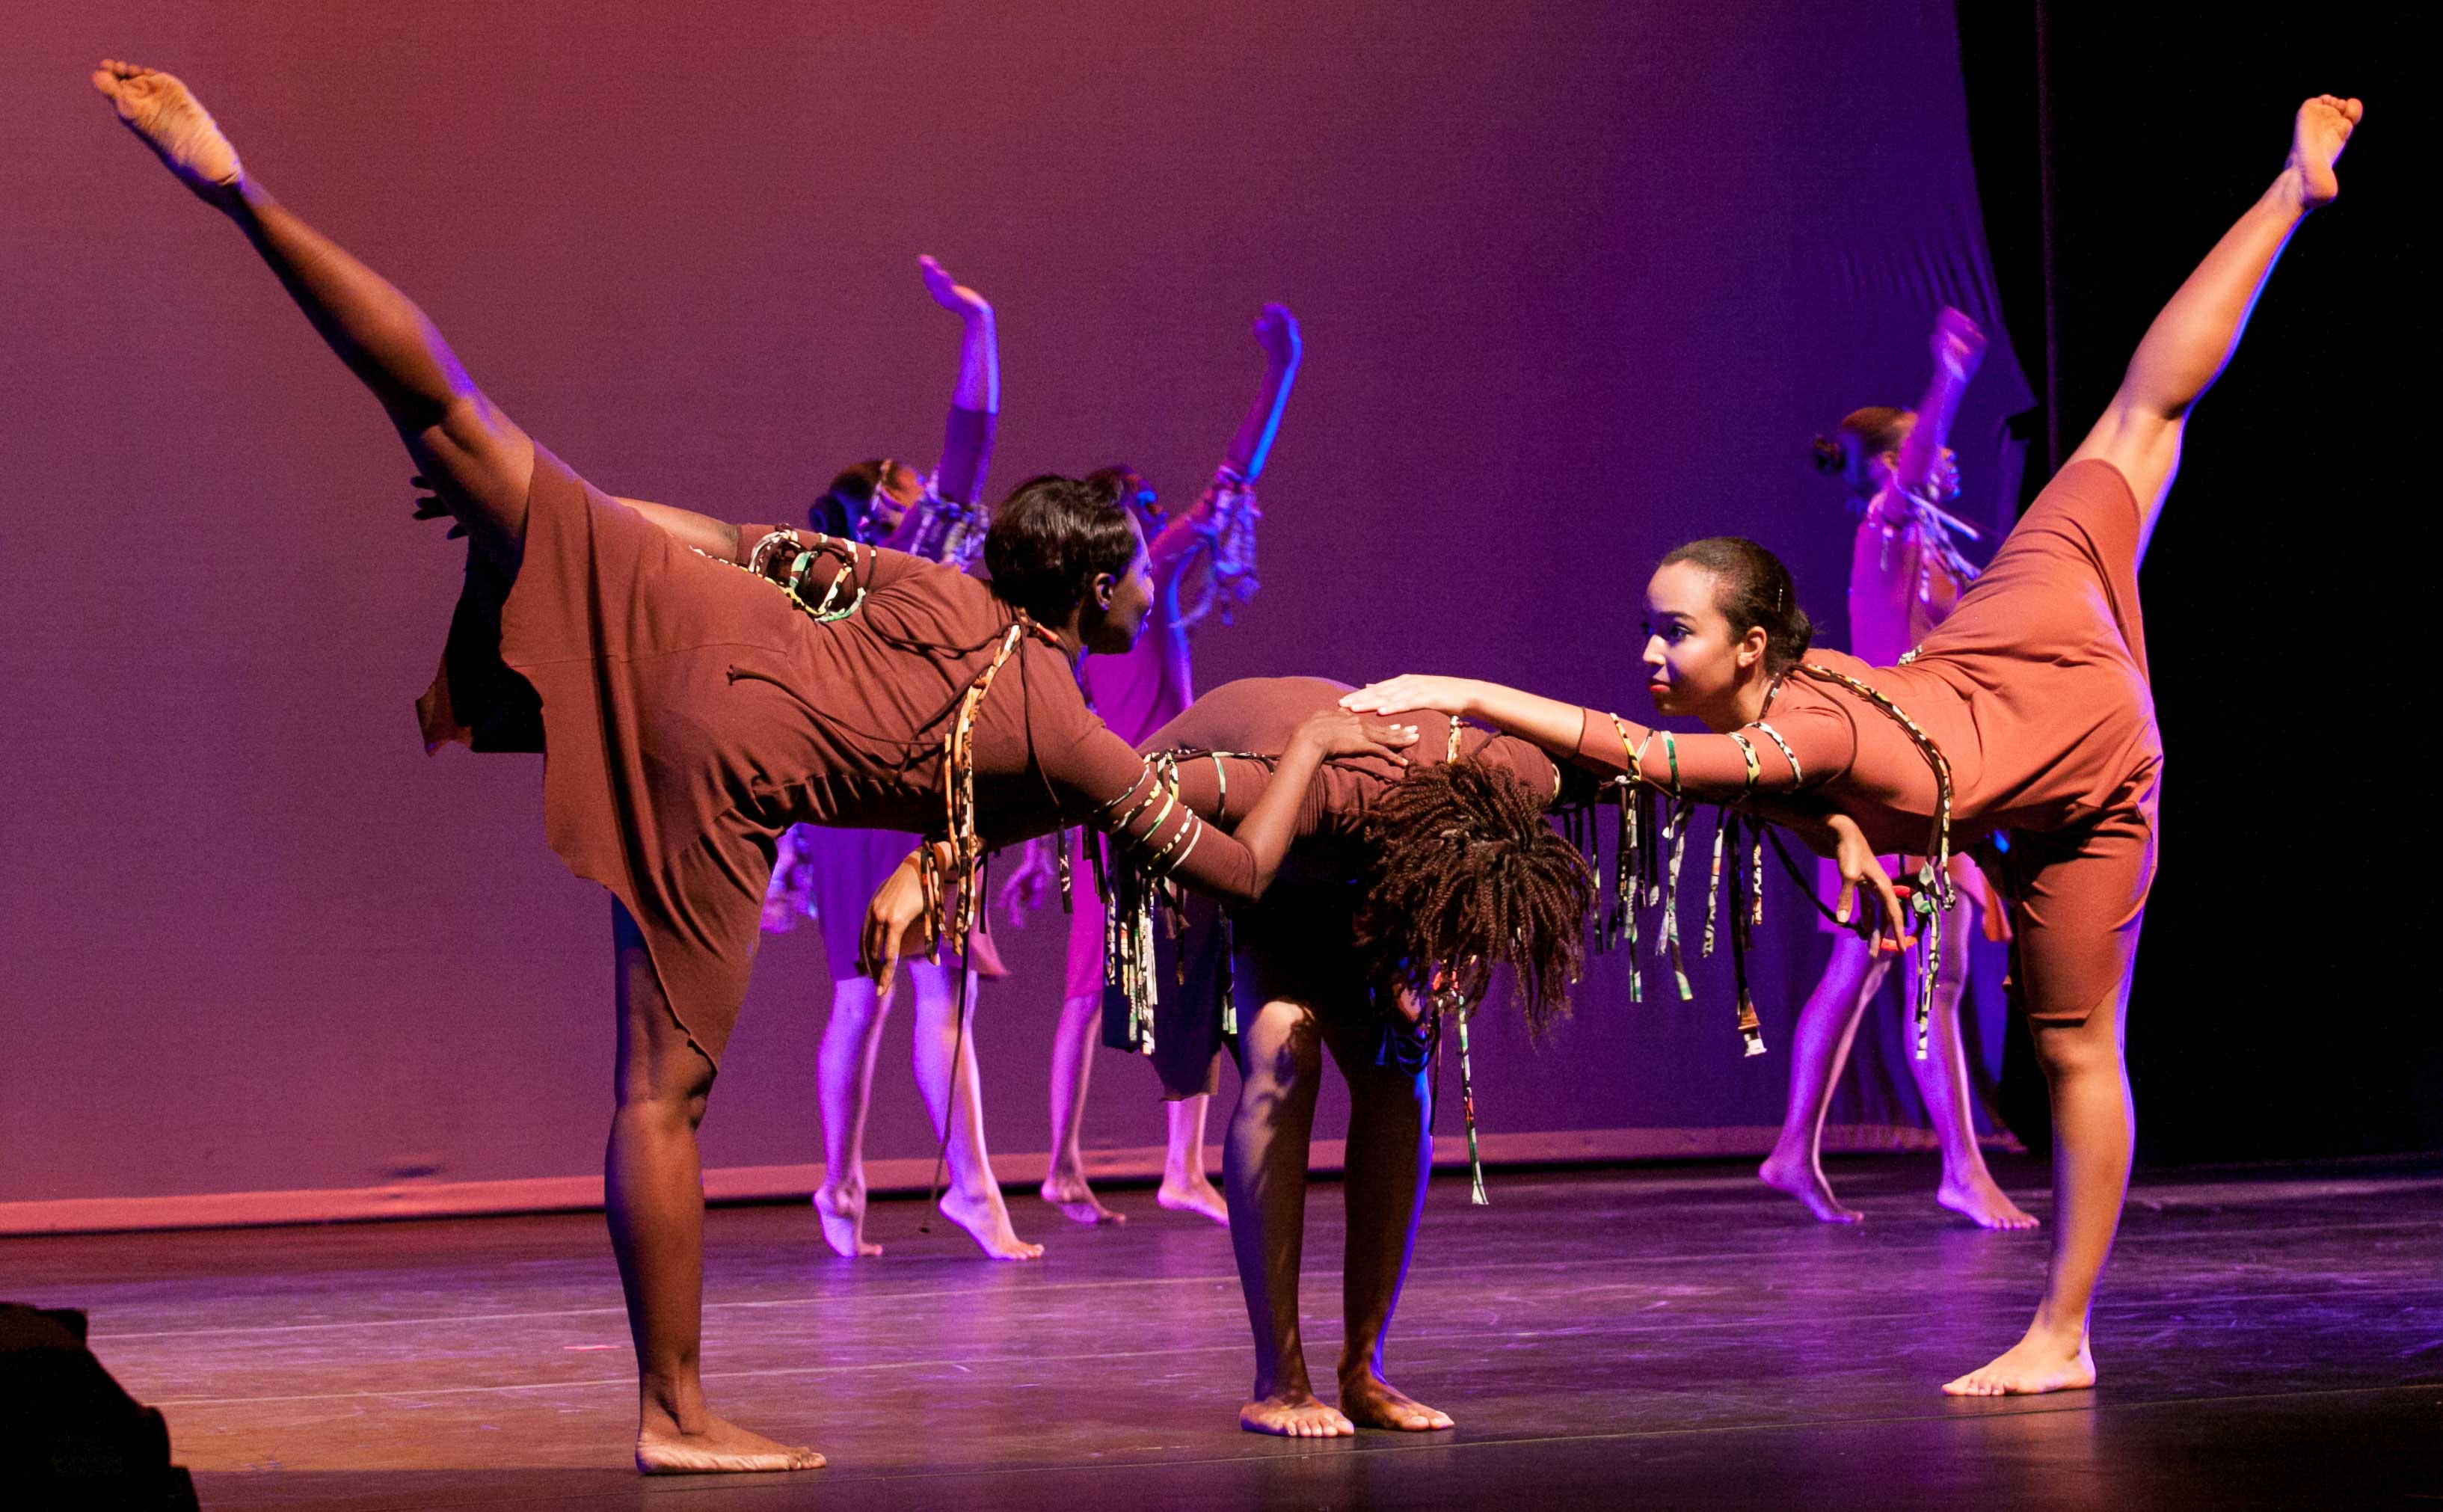 The NDDCI in the re-staging of Jeffrey Carter’s 1993 choreography, Rhythmic Souls, during the 2012 dance season, Transition. Photo courtesy Mark Gellineau for the NDDCI.